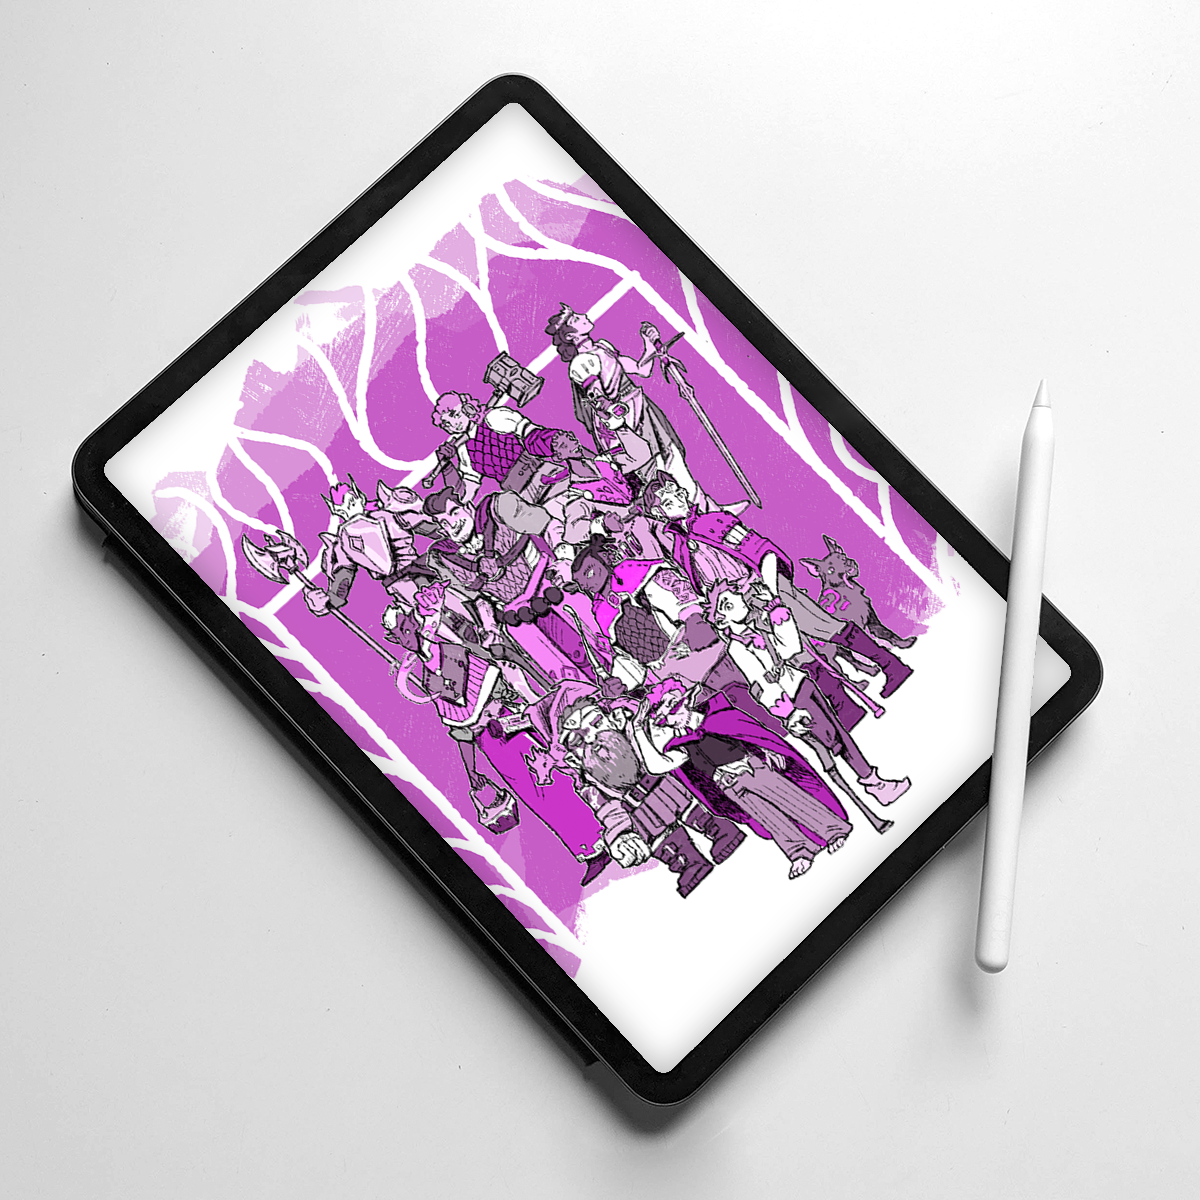 Image shows an iPad Pro tablet with an Apple Pencil balanced on it. There is a group illustration of adventurers grouped together; some of them have visible disabilities, such requiring crutches or sensory muffling earphones, while others have invisible disabilities. 